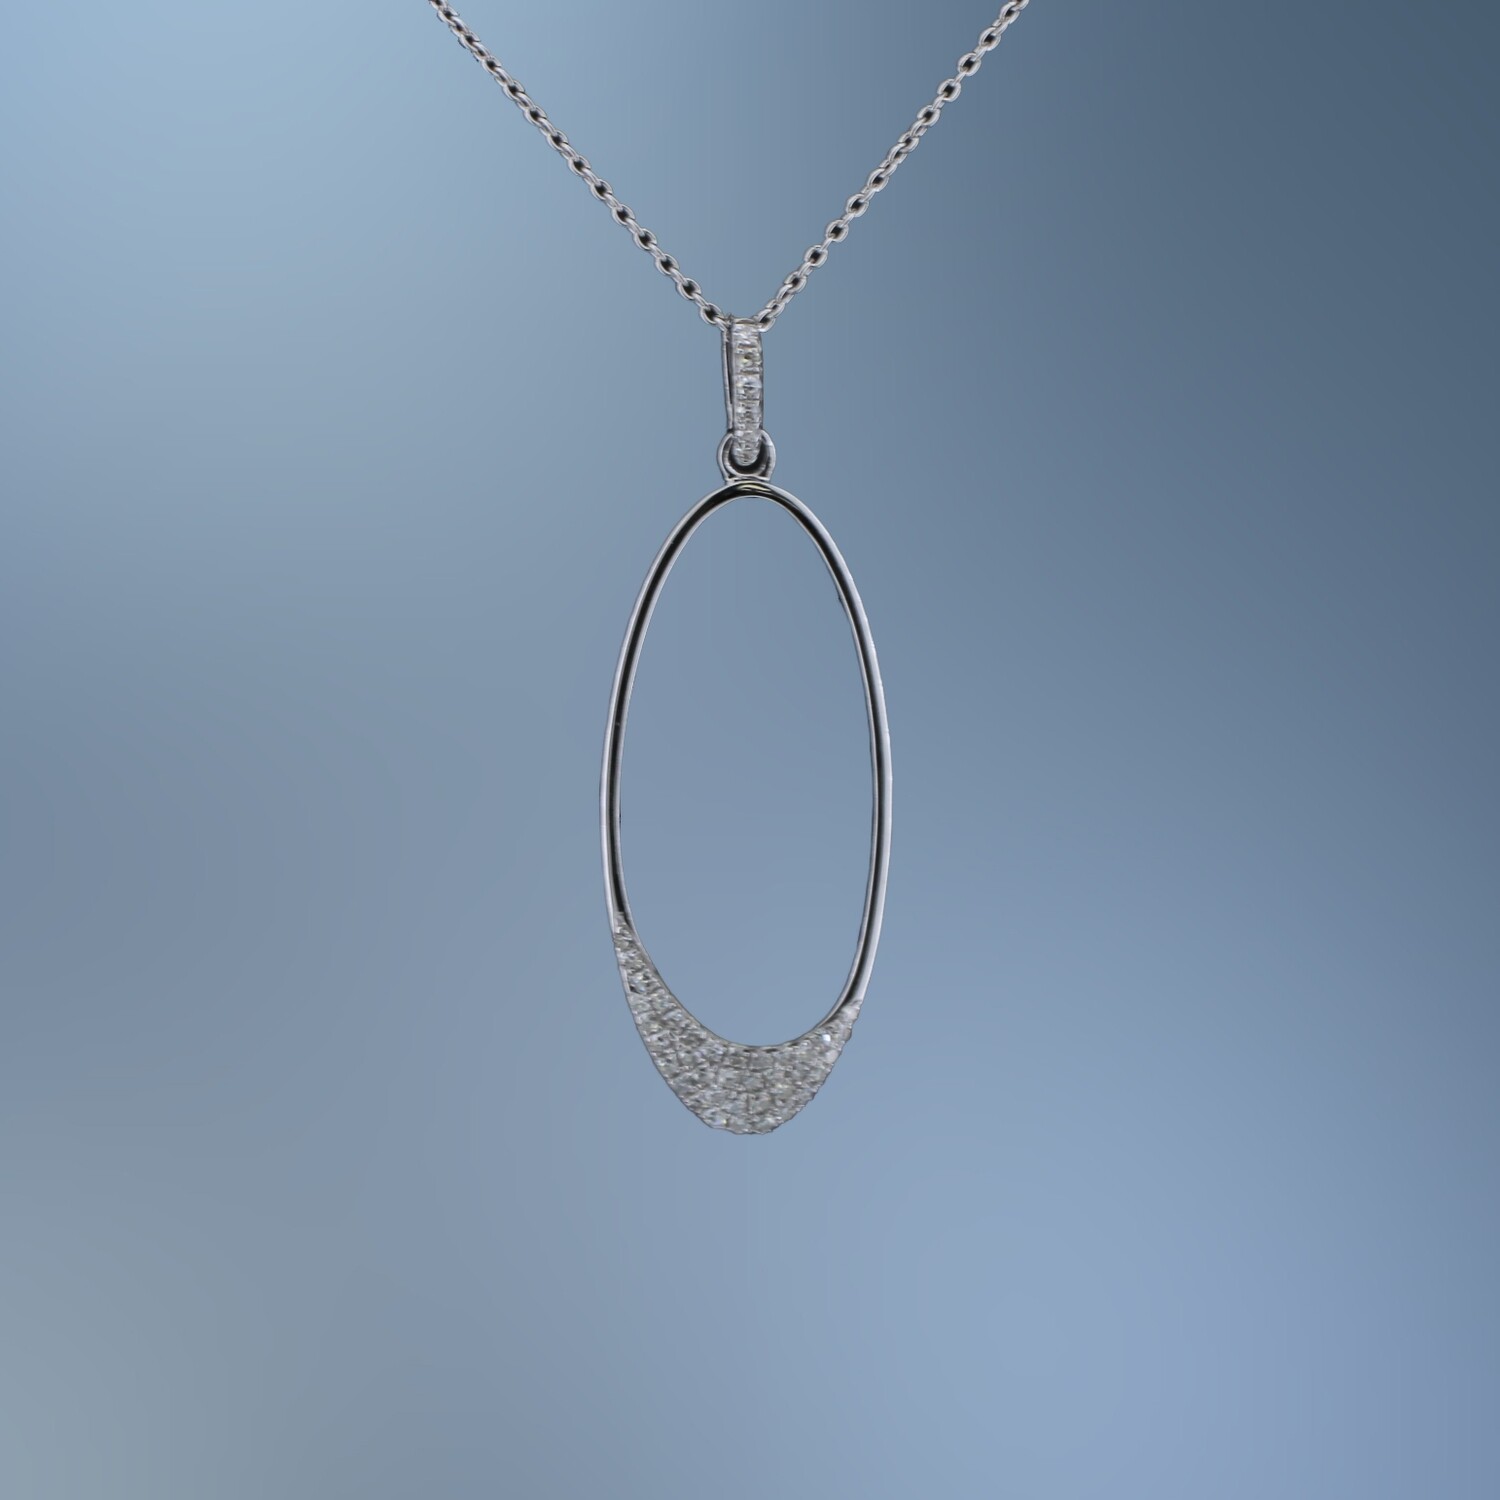 14KT WHITE GOLD OVAL DIAMOND PENDANT FEATURING 43 ROUND BRILLIANT CUT DIAMONDS TOTALING 0.11 CTS